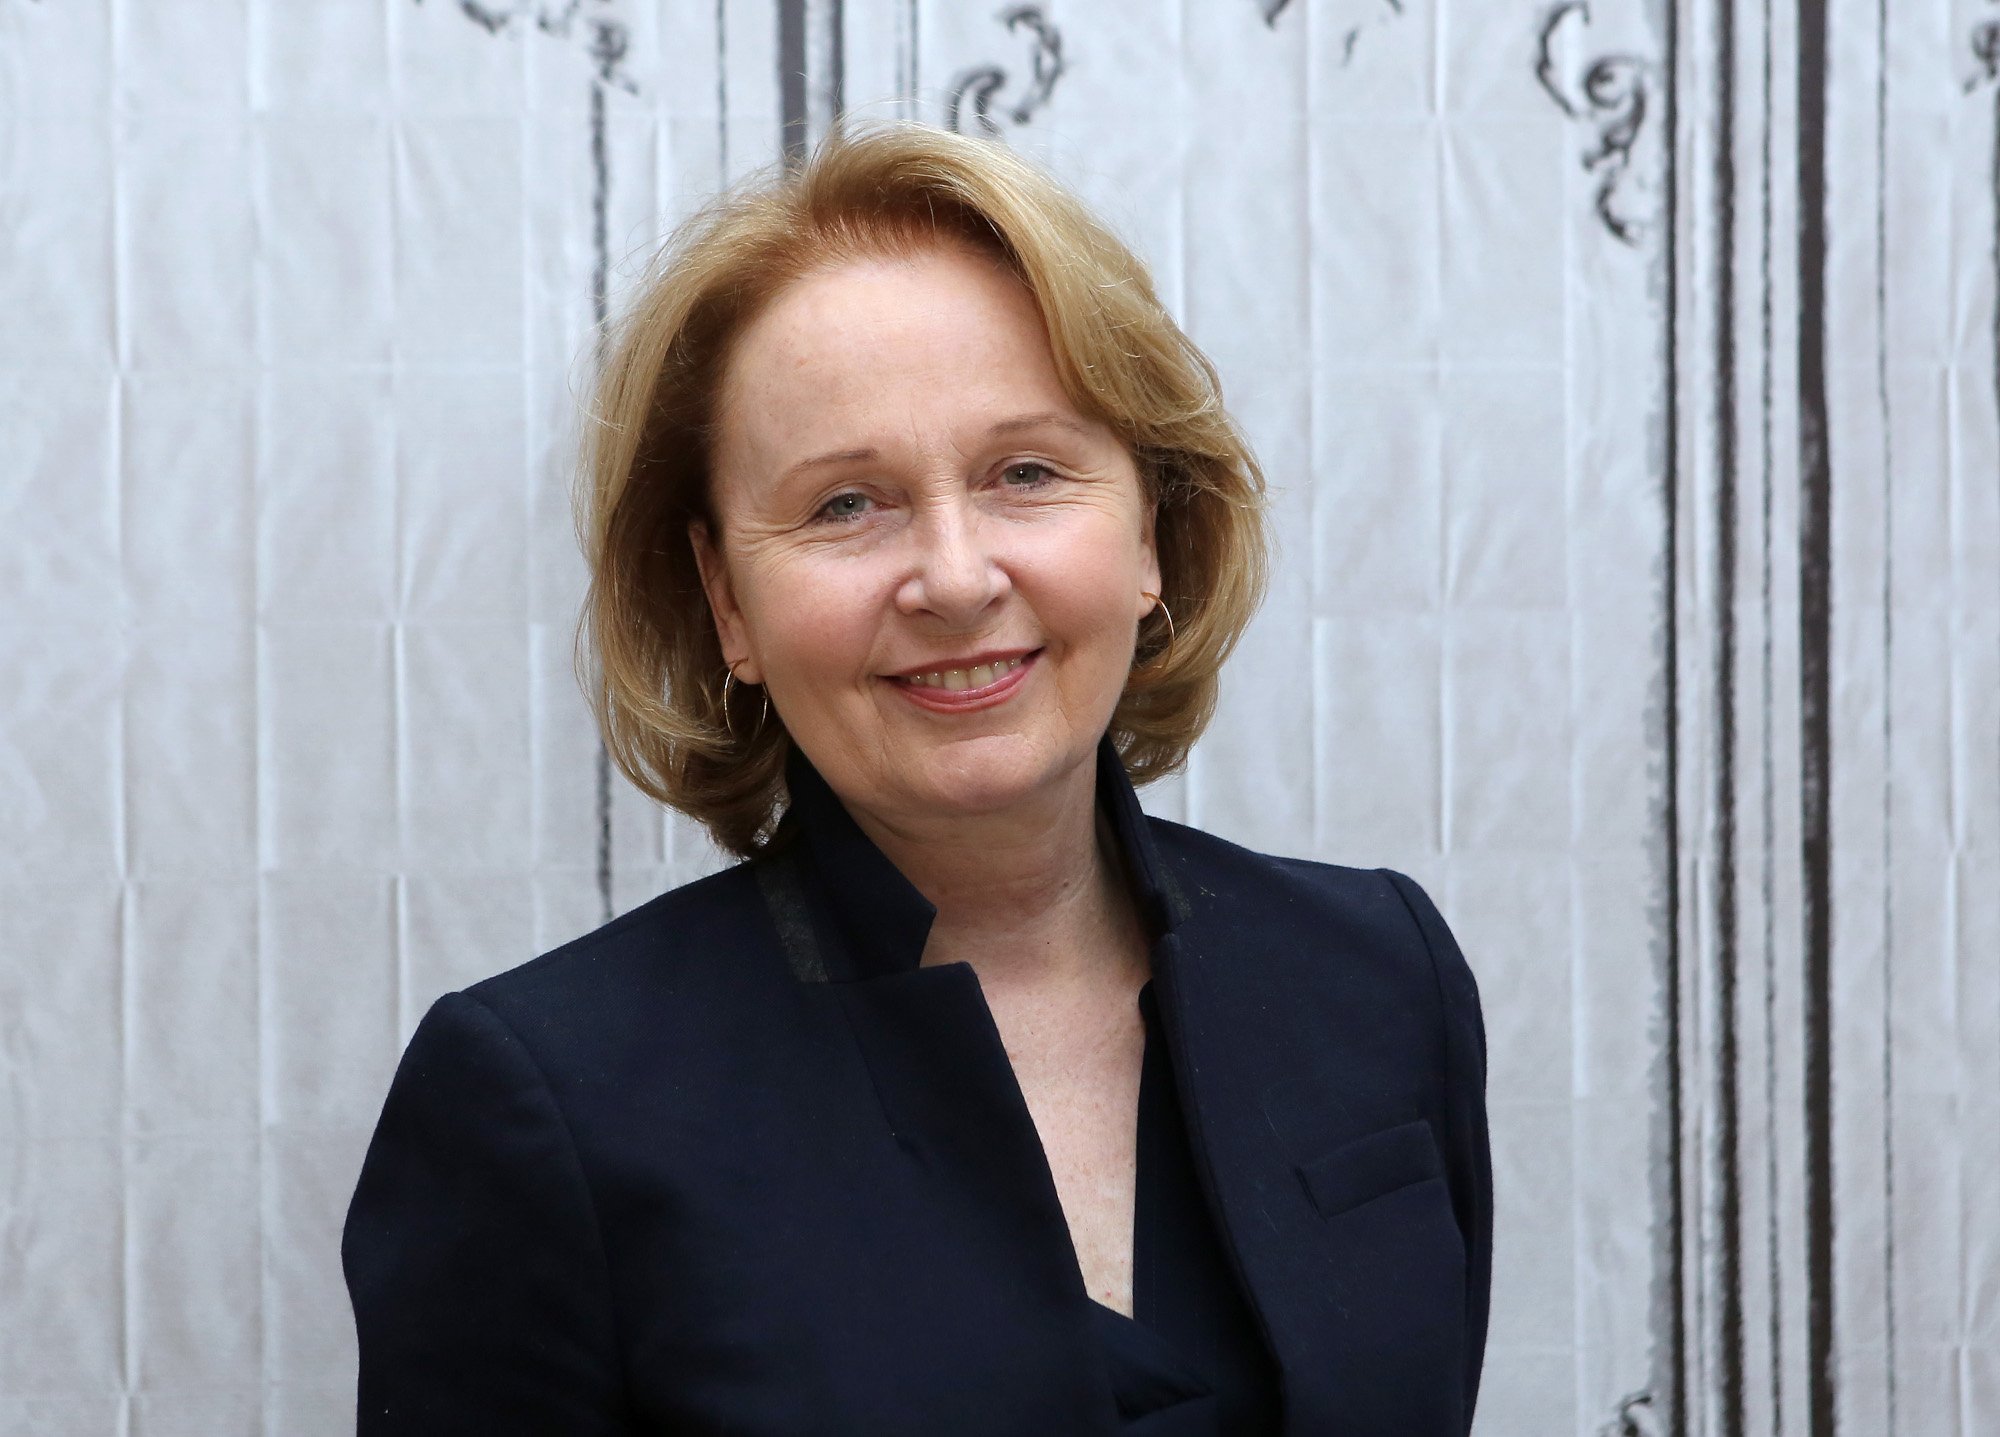 Kate Burton, who plays Meredith Grey's mother on Greys Anatomy, wearing a black blazer and smiling at the camera. Her hair is down and she's standing in front of a white wall.